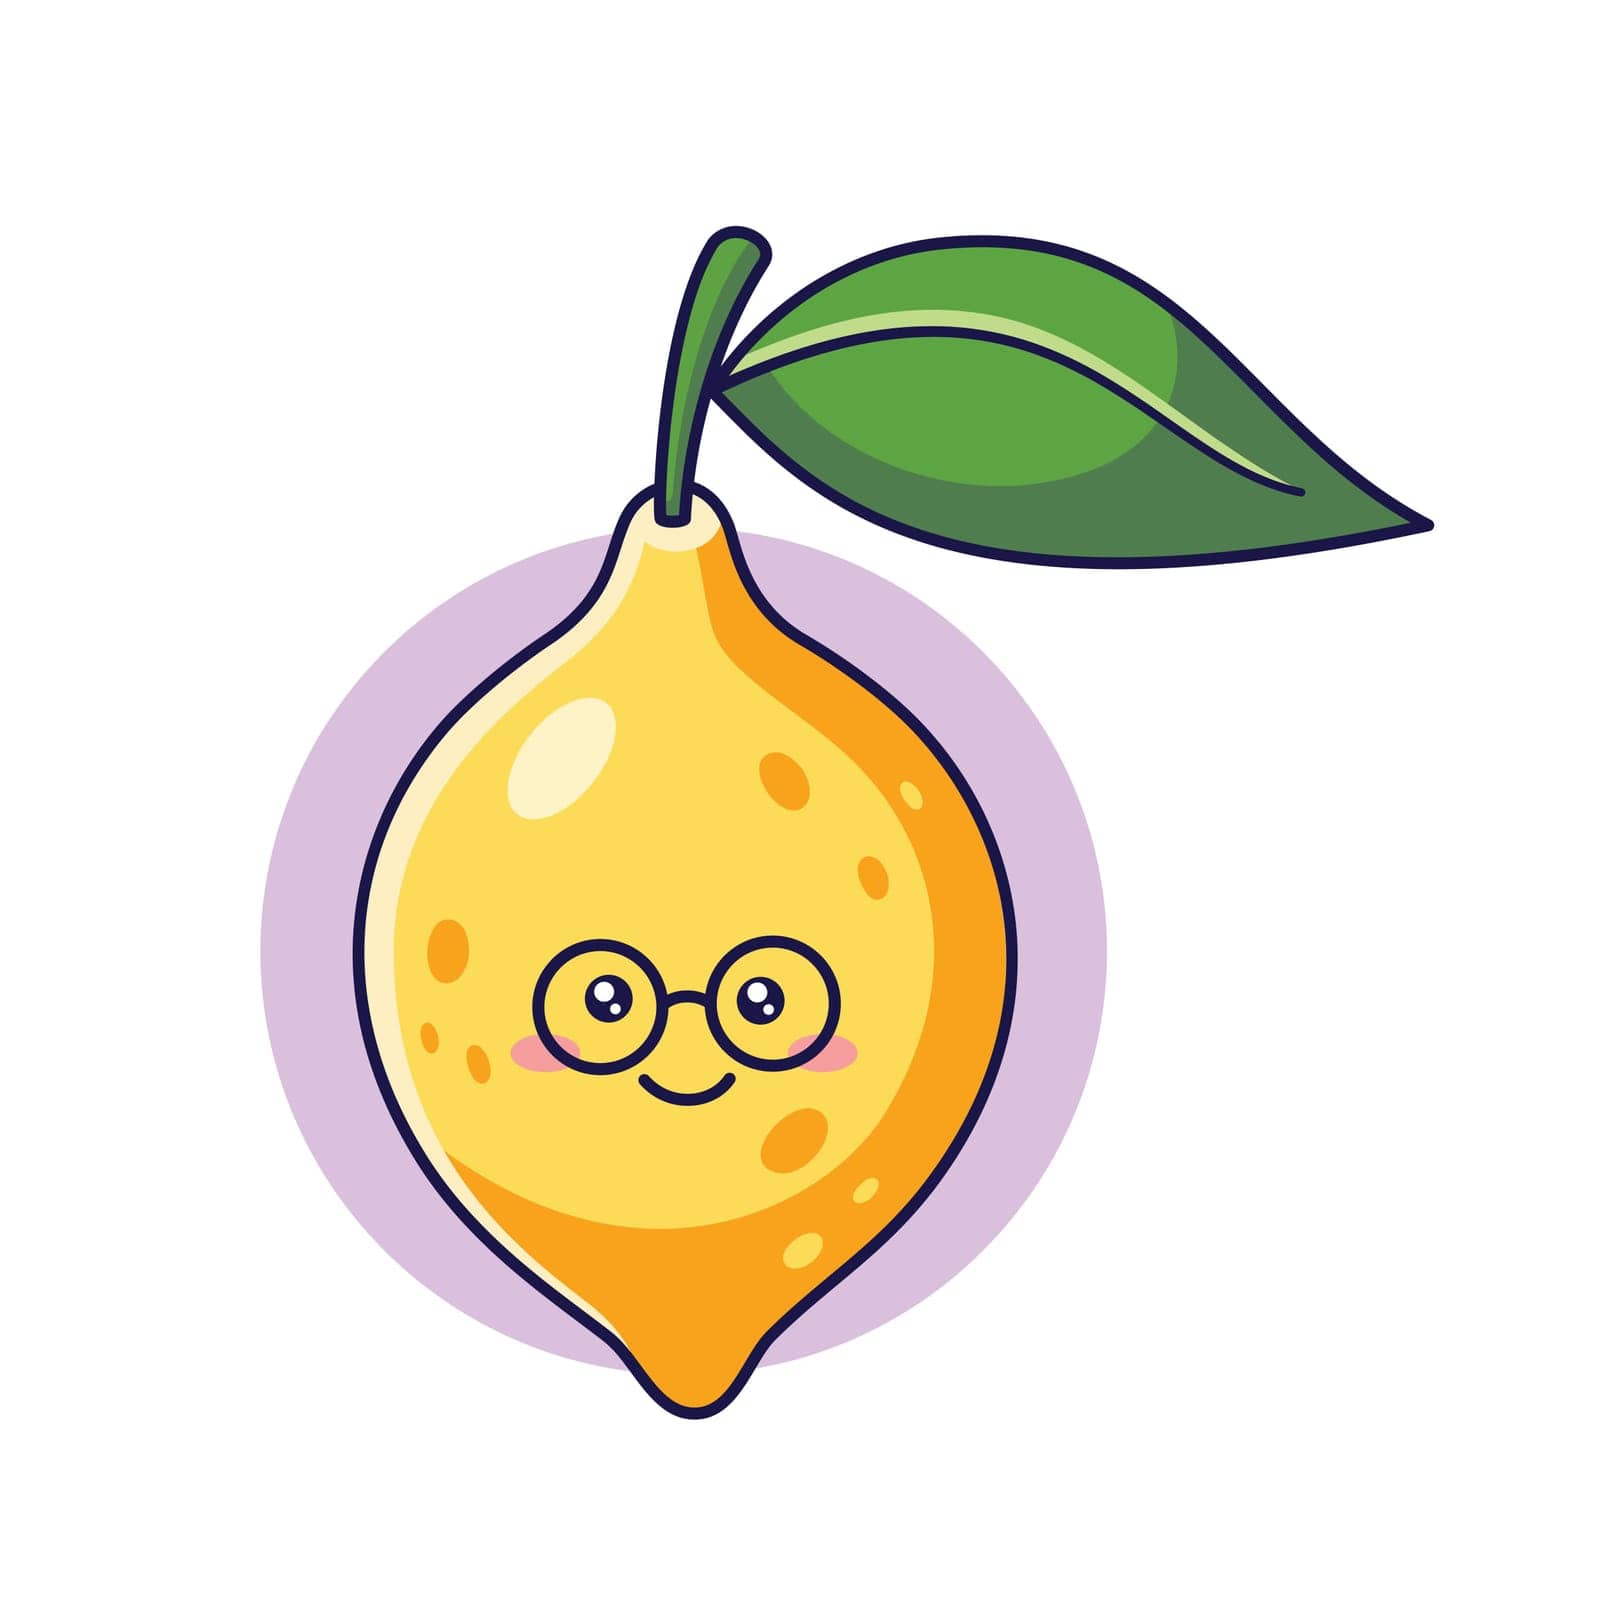 Cute Kawaii Lemon character with glasses. Vector hand drawn cartoon icon illustration. Lemon character in doodle style. Isolated on white background. Shy nerd lemon character.